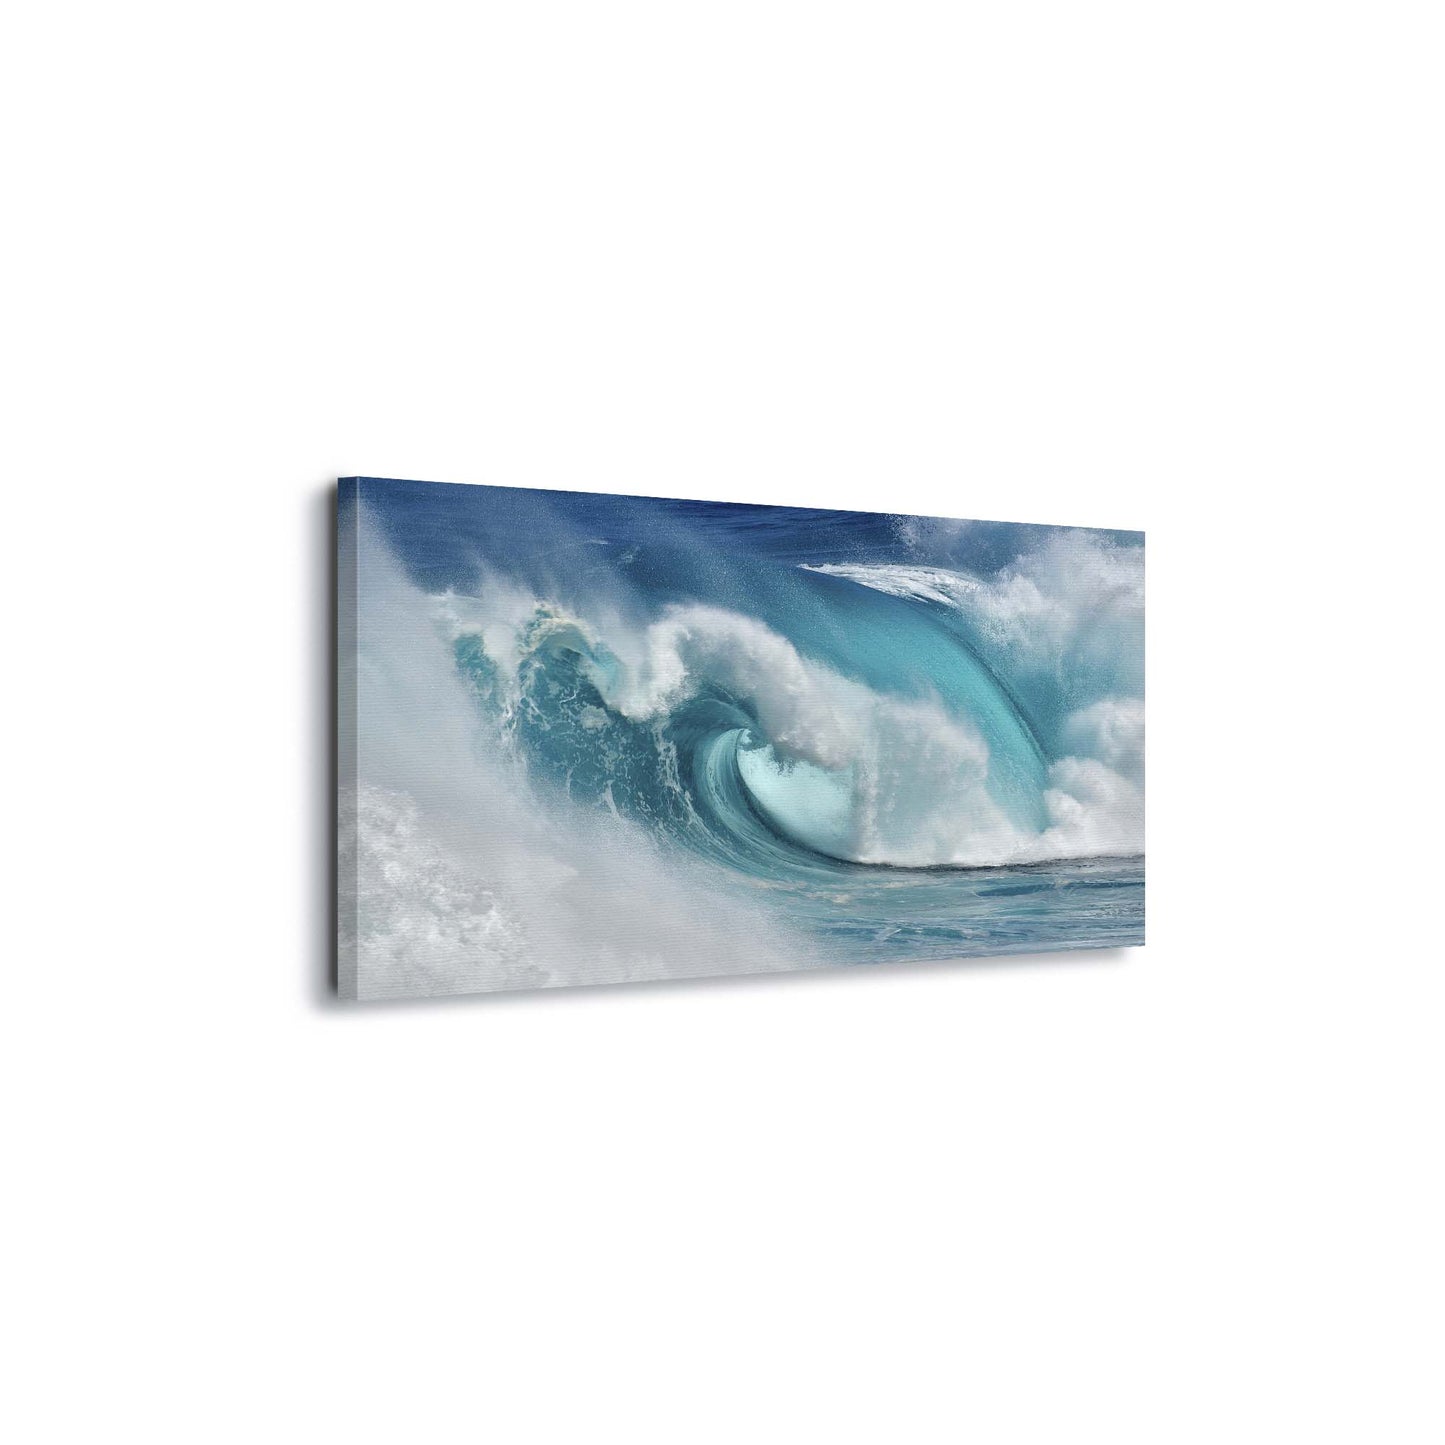 When the ocean turns into blue fire by Daniel Montero Canvas Print - USTAD HOME